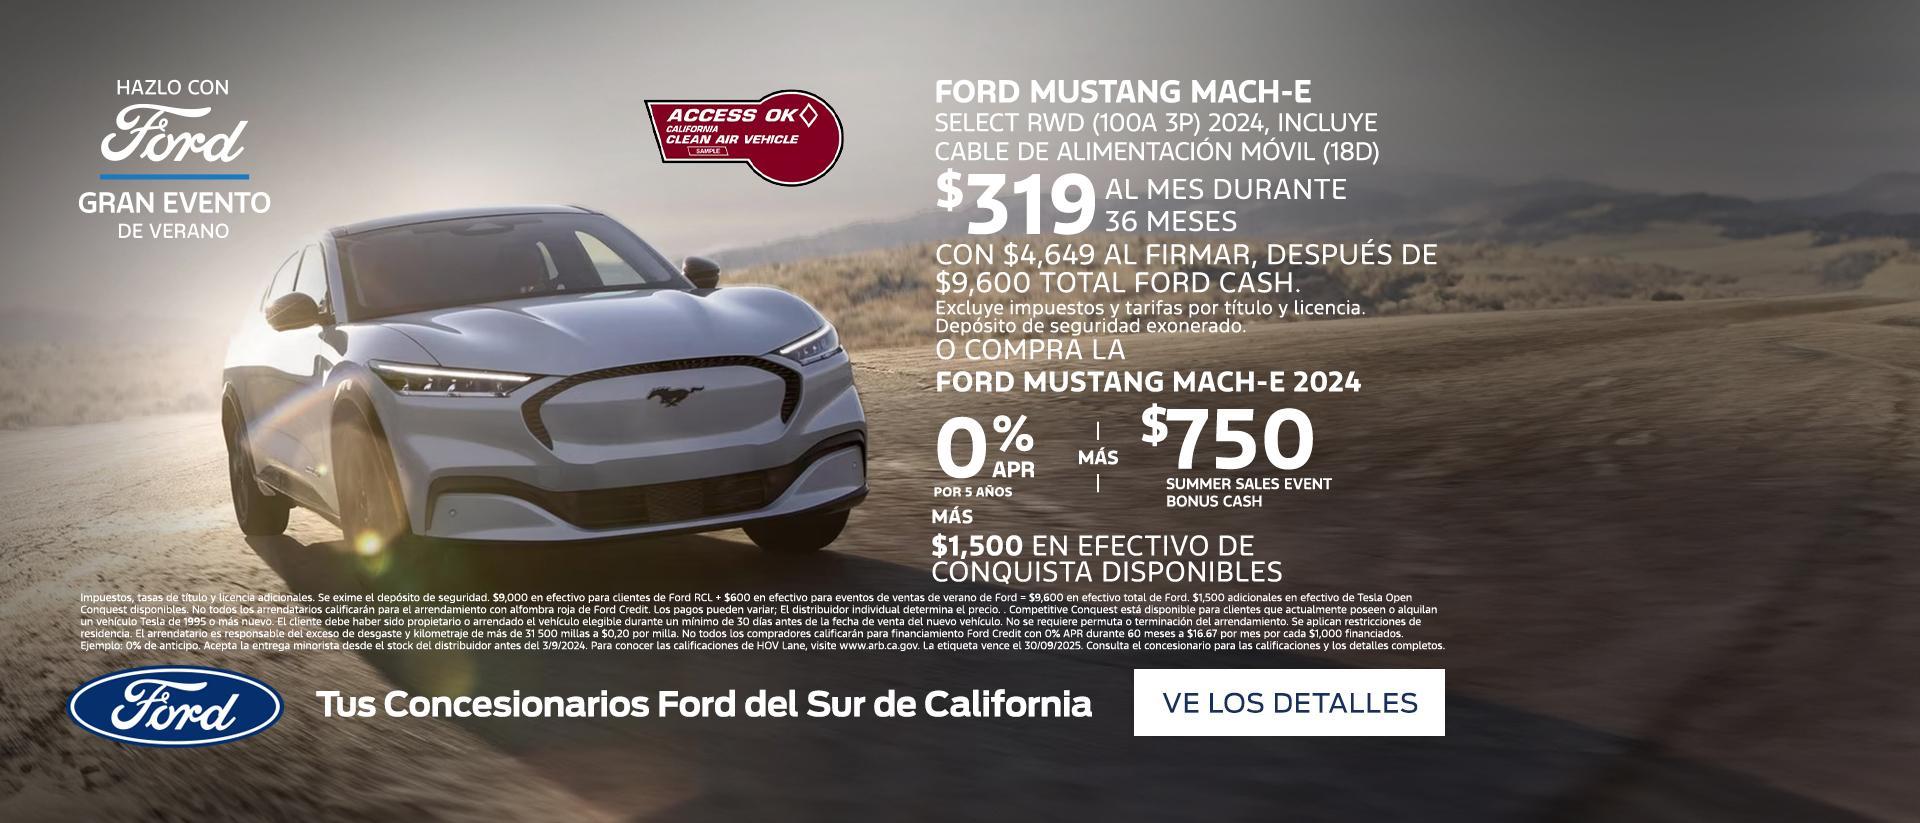 Make it Ford Summer Sales Event | Ford Mustang Mach-E Offers | Southern California Ford Dealers